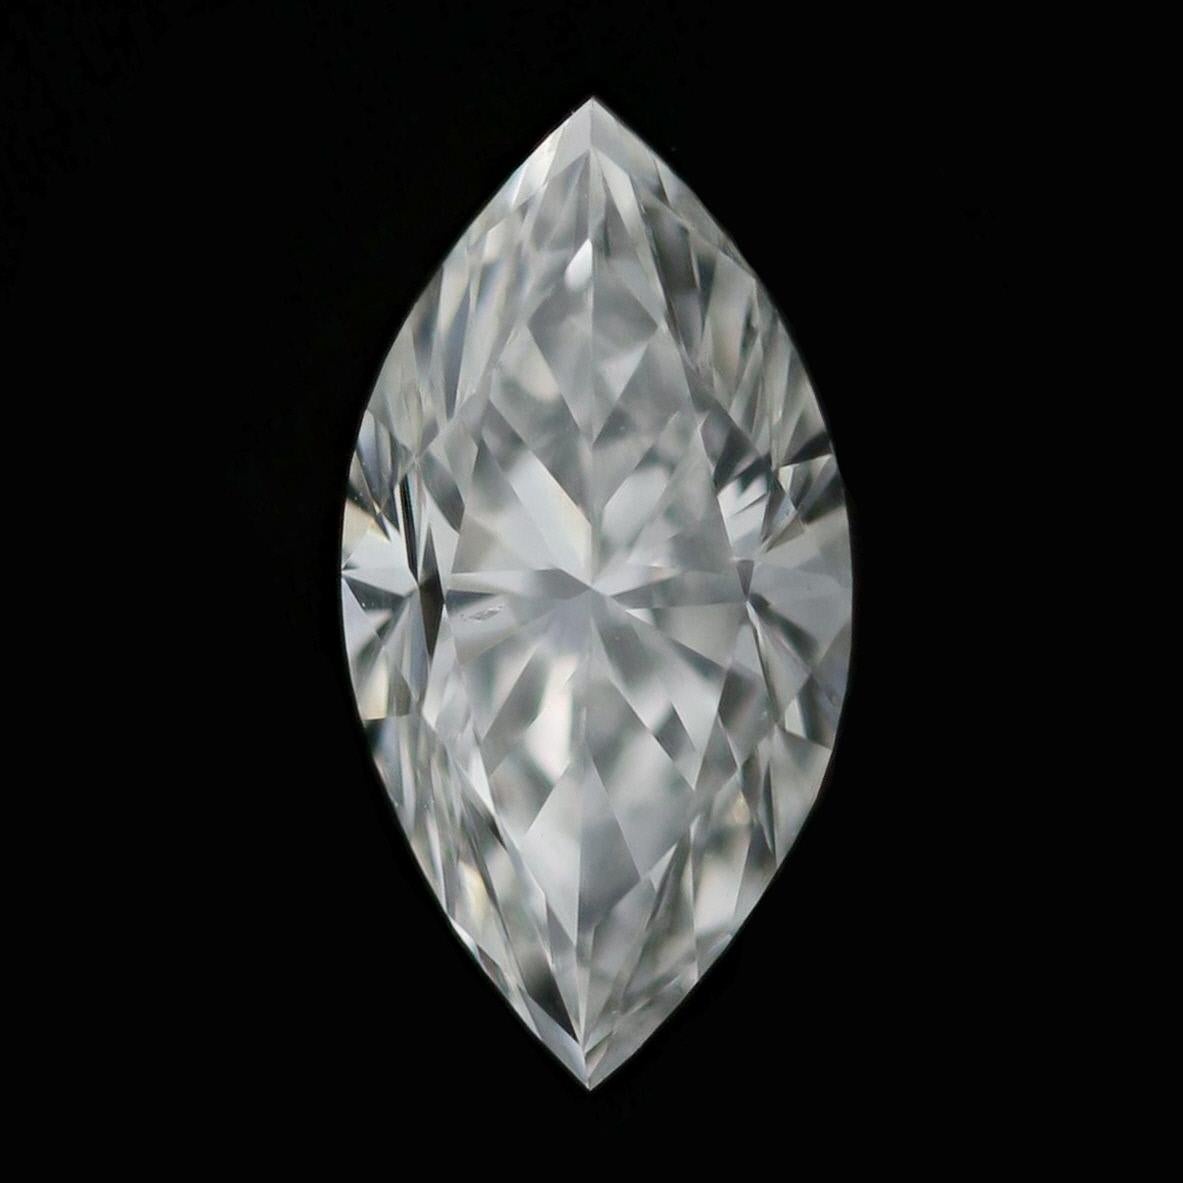 Shape/Cut: Marquise  
Clarity: VS2 
Color: G  
Dimensions (mm): 8.94 x 4.58 x 3.11 
Weight: 0.72ct  

GIA Report Number: 6204488976 

Condition: New  

Please check out the enlarged pictures.

Thank you for taking the time to read our description.